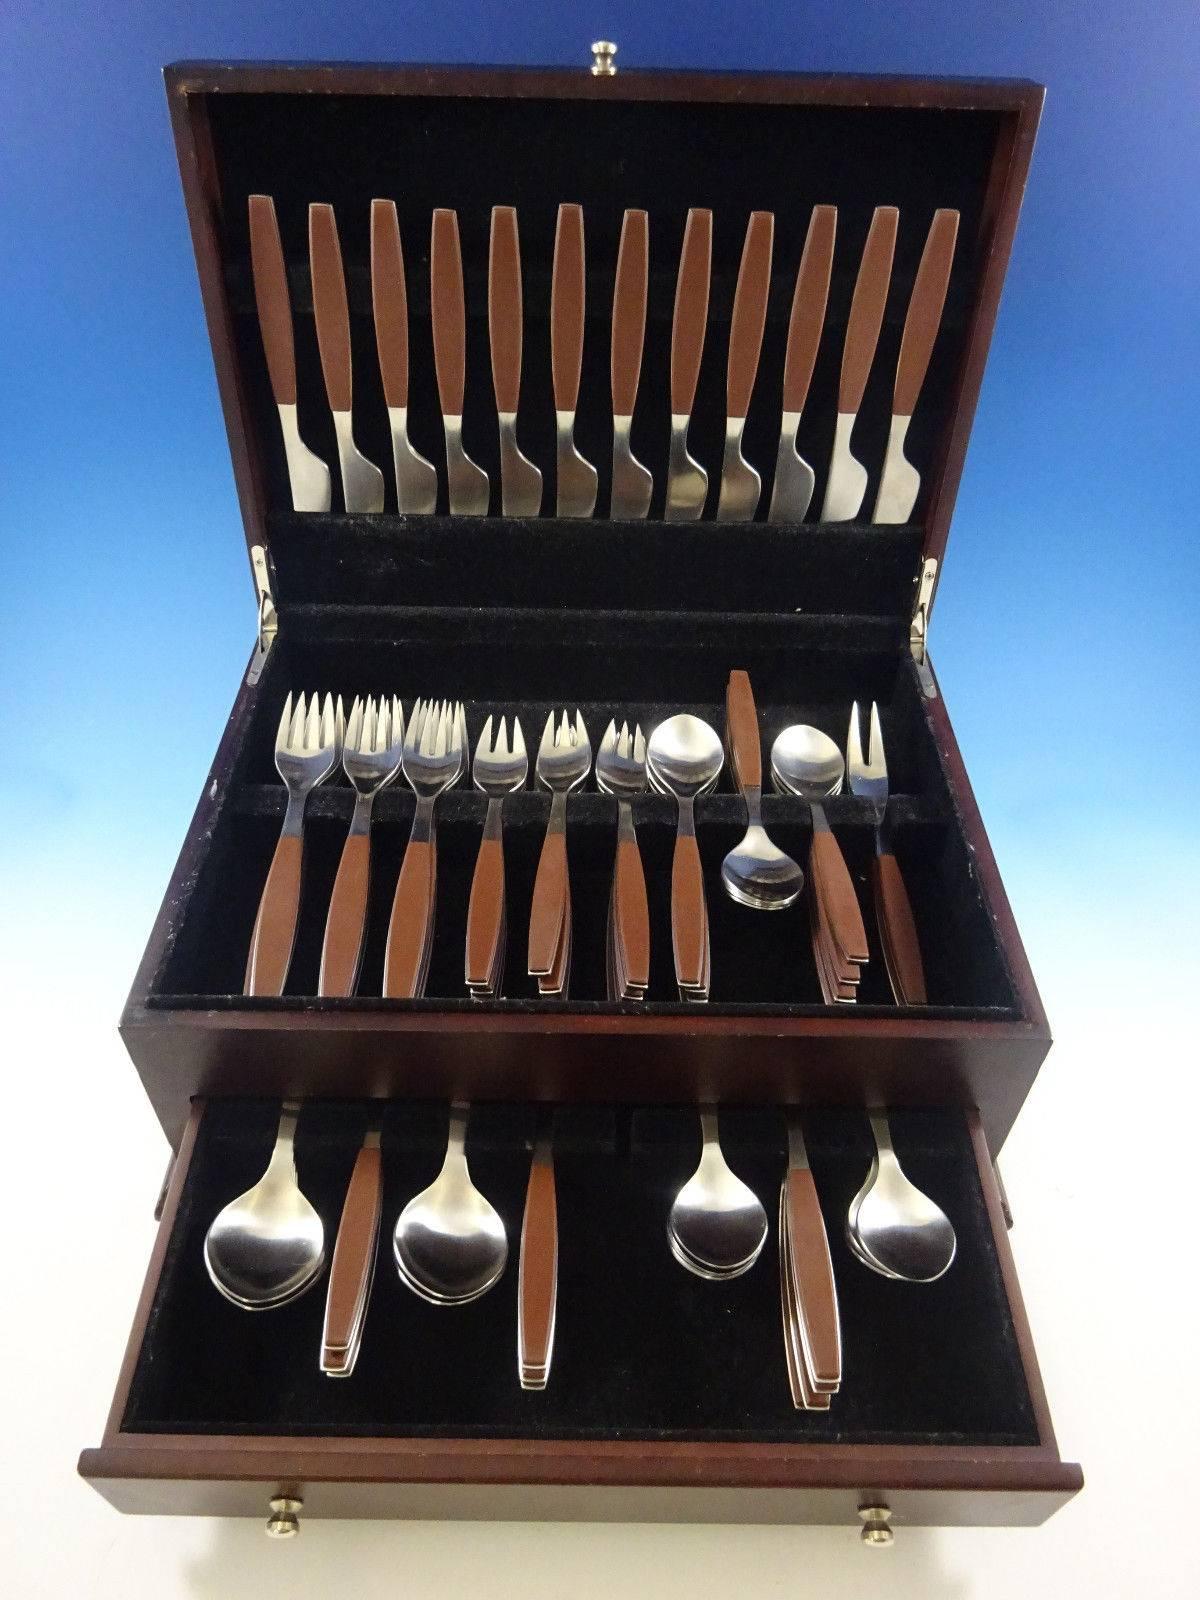 Vintage Strata Brown by Georg Jensen stainless steel Nordic modern flatware set - 74 pieces. 

This set includes:

•12 knives, 8